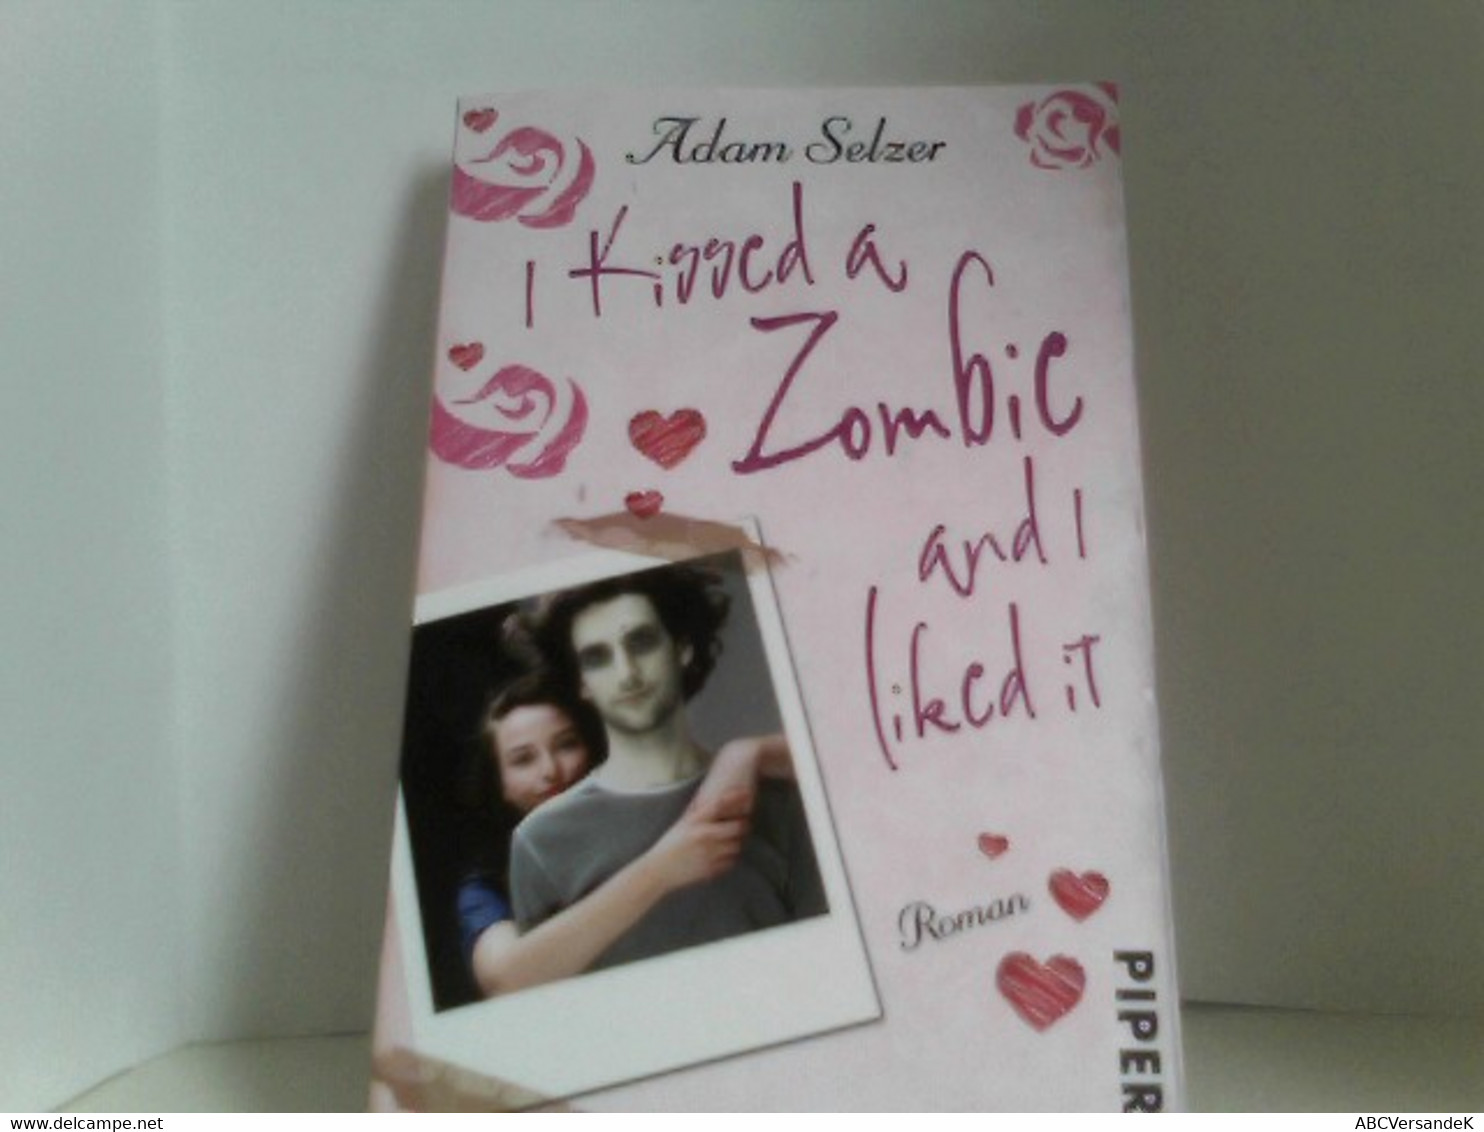 I Kissed A Zombie And I Liked It: Roman - Sci-Fi